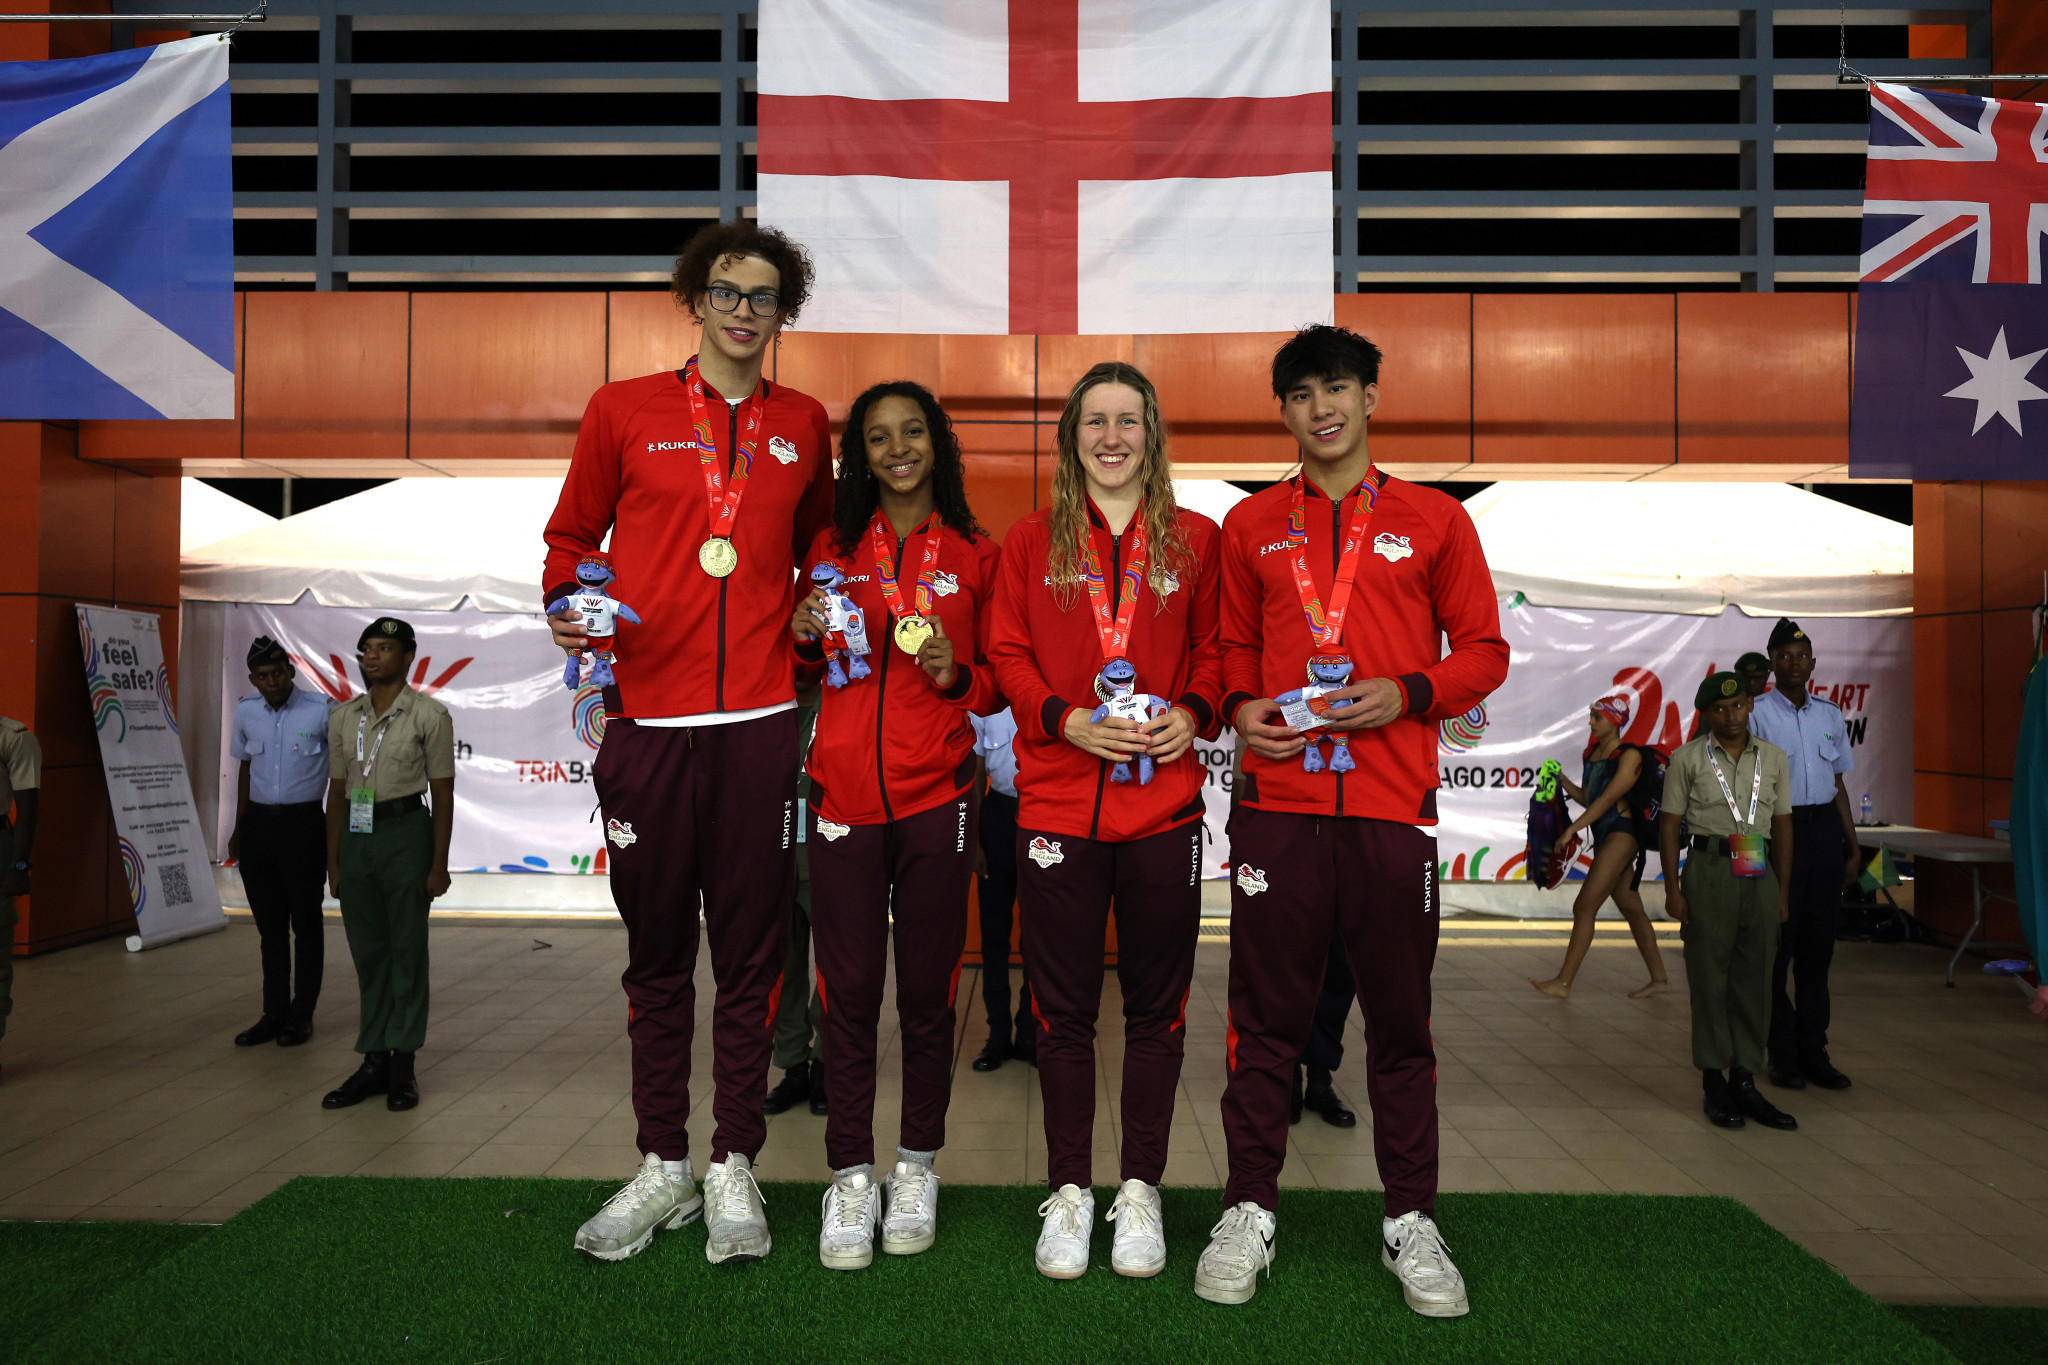 England finished swimming competition at Trinbago 2023 with victory in the mixed 4x100m medley relay ©Getty Images